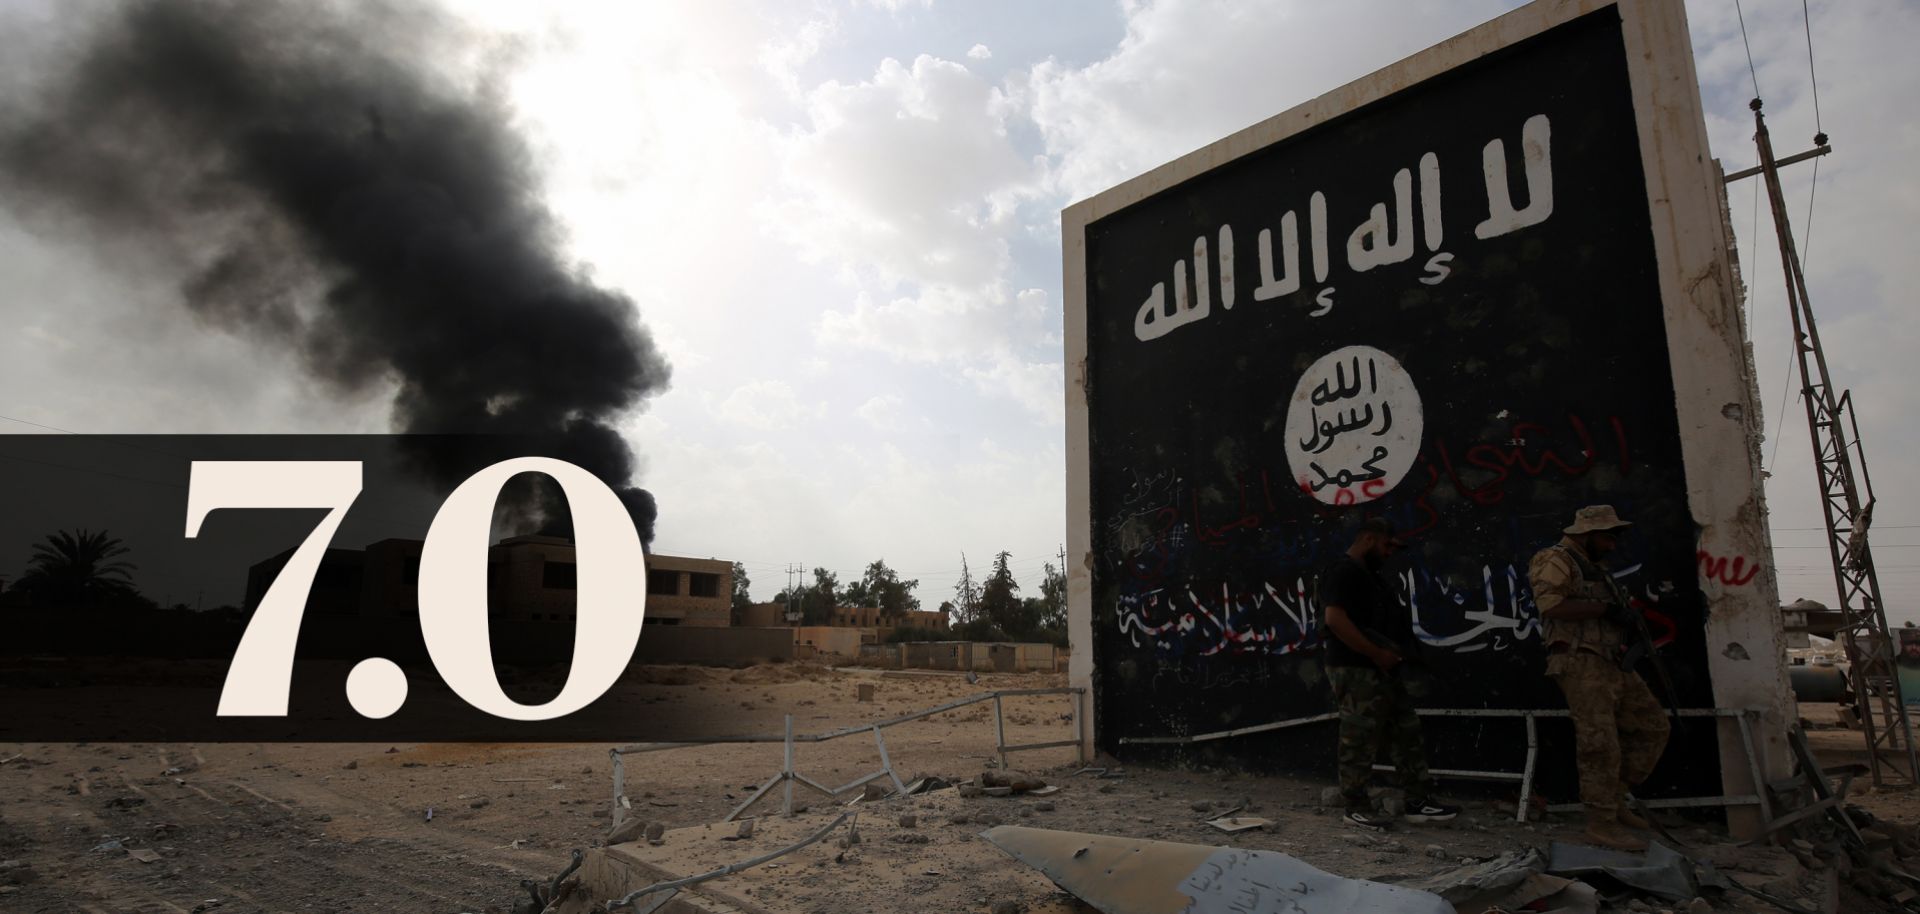 Iraqi fighters enter the city of Qaim on Nov. 3 near a wall bearing an image of the Islamic State flag.